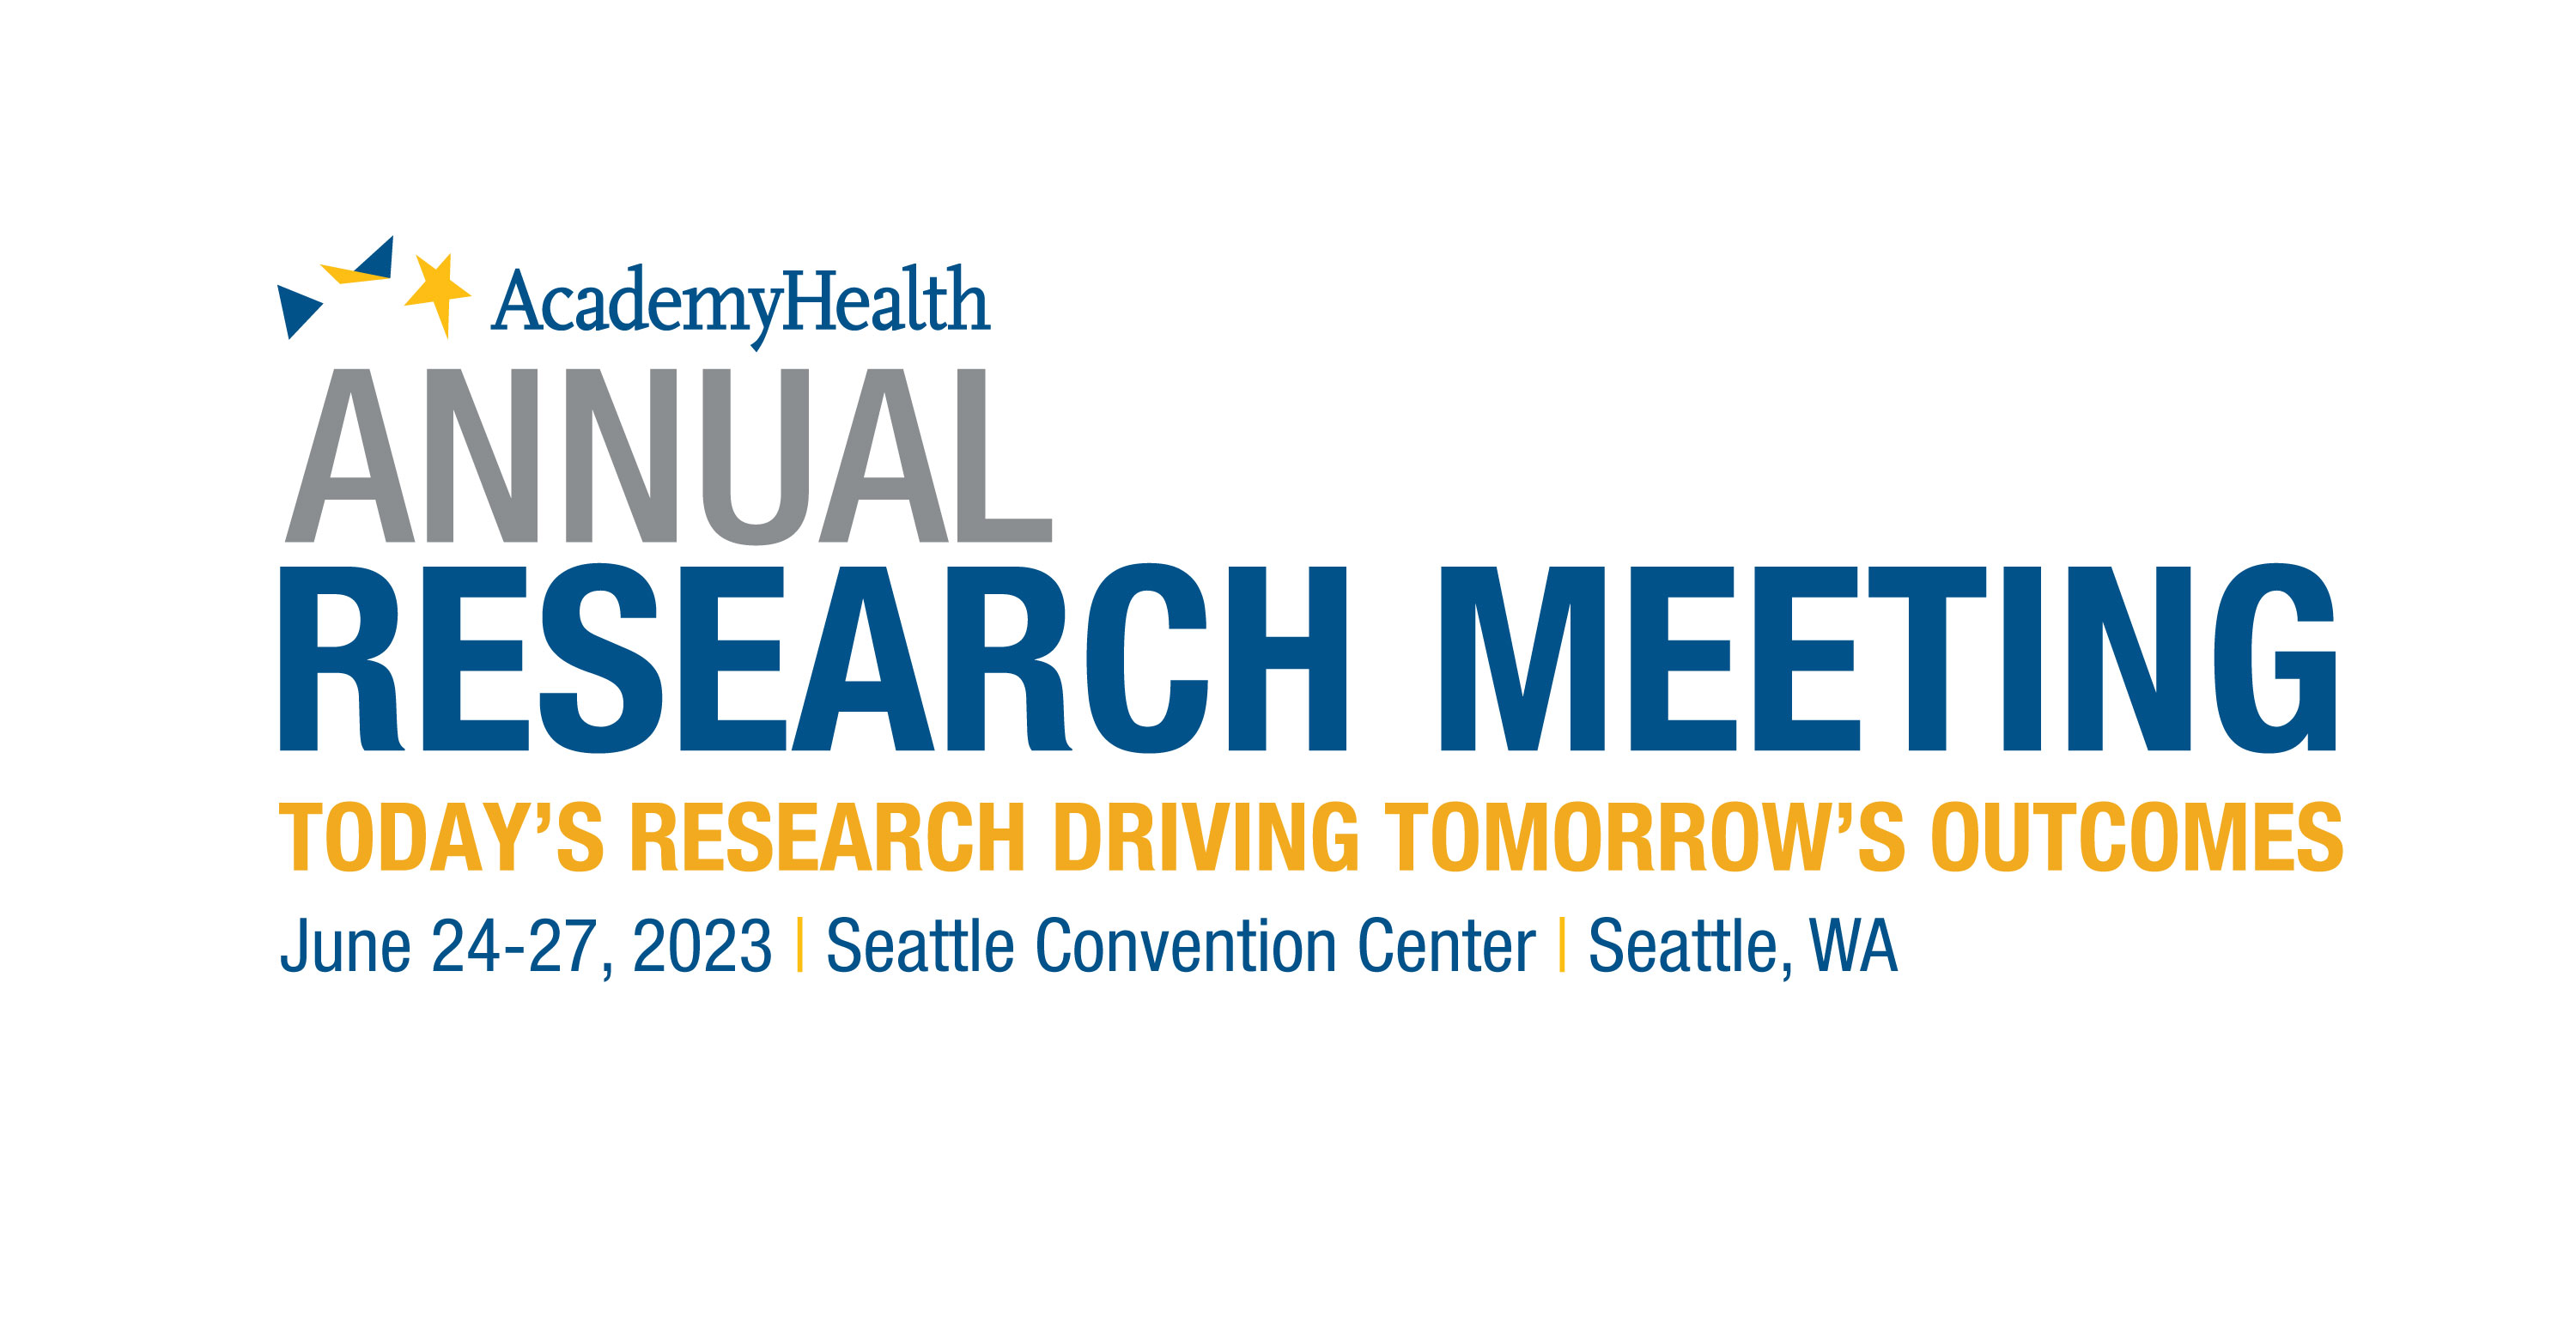 Marketing Toolkit Annual Research Meeting AcademyHealth